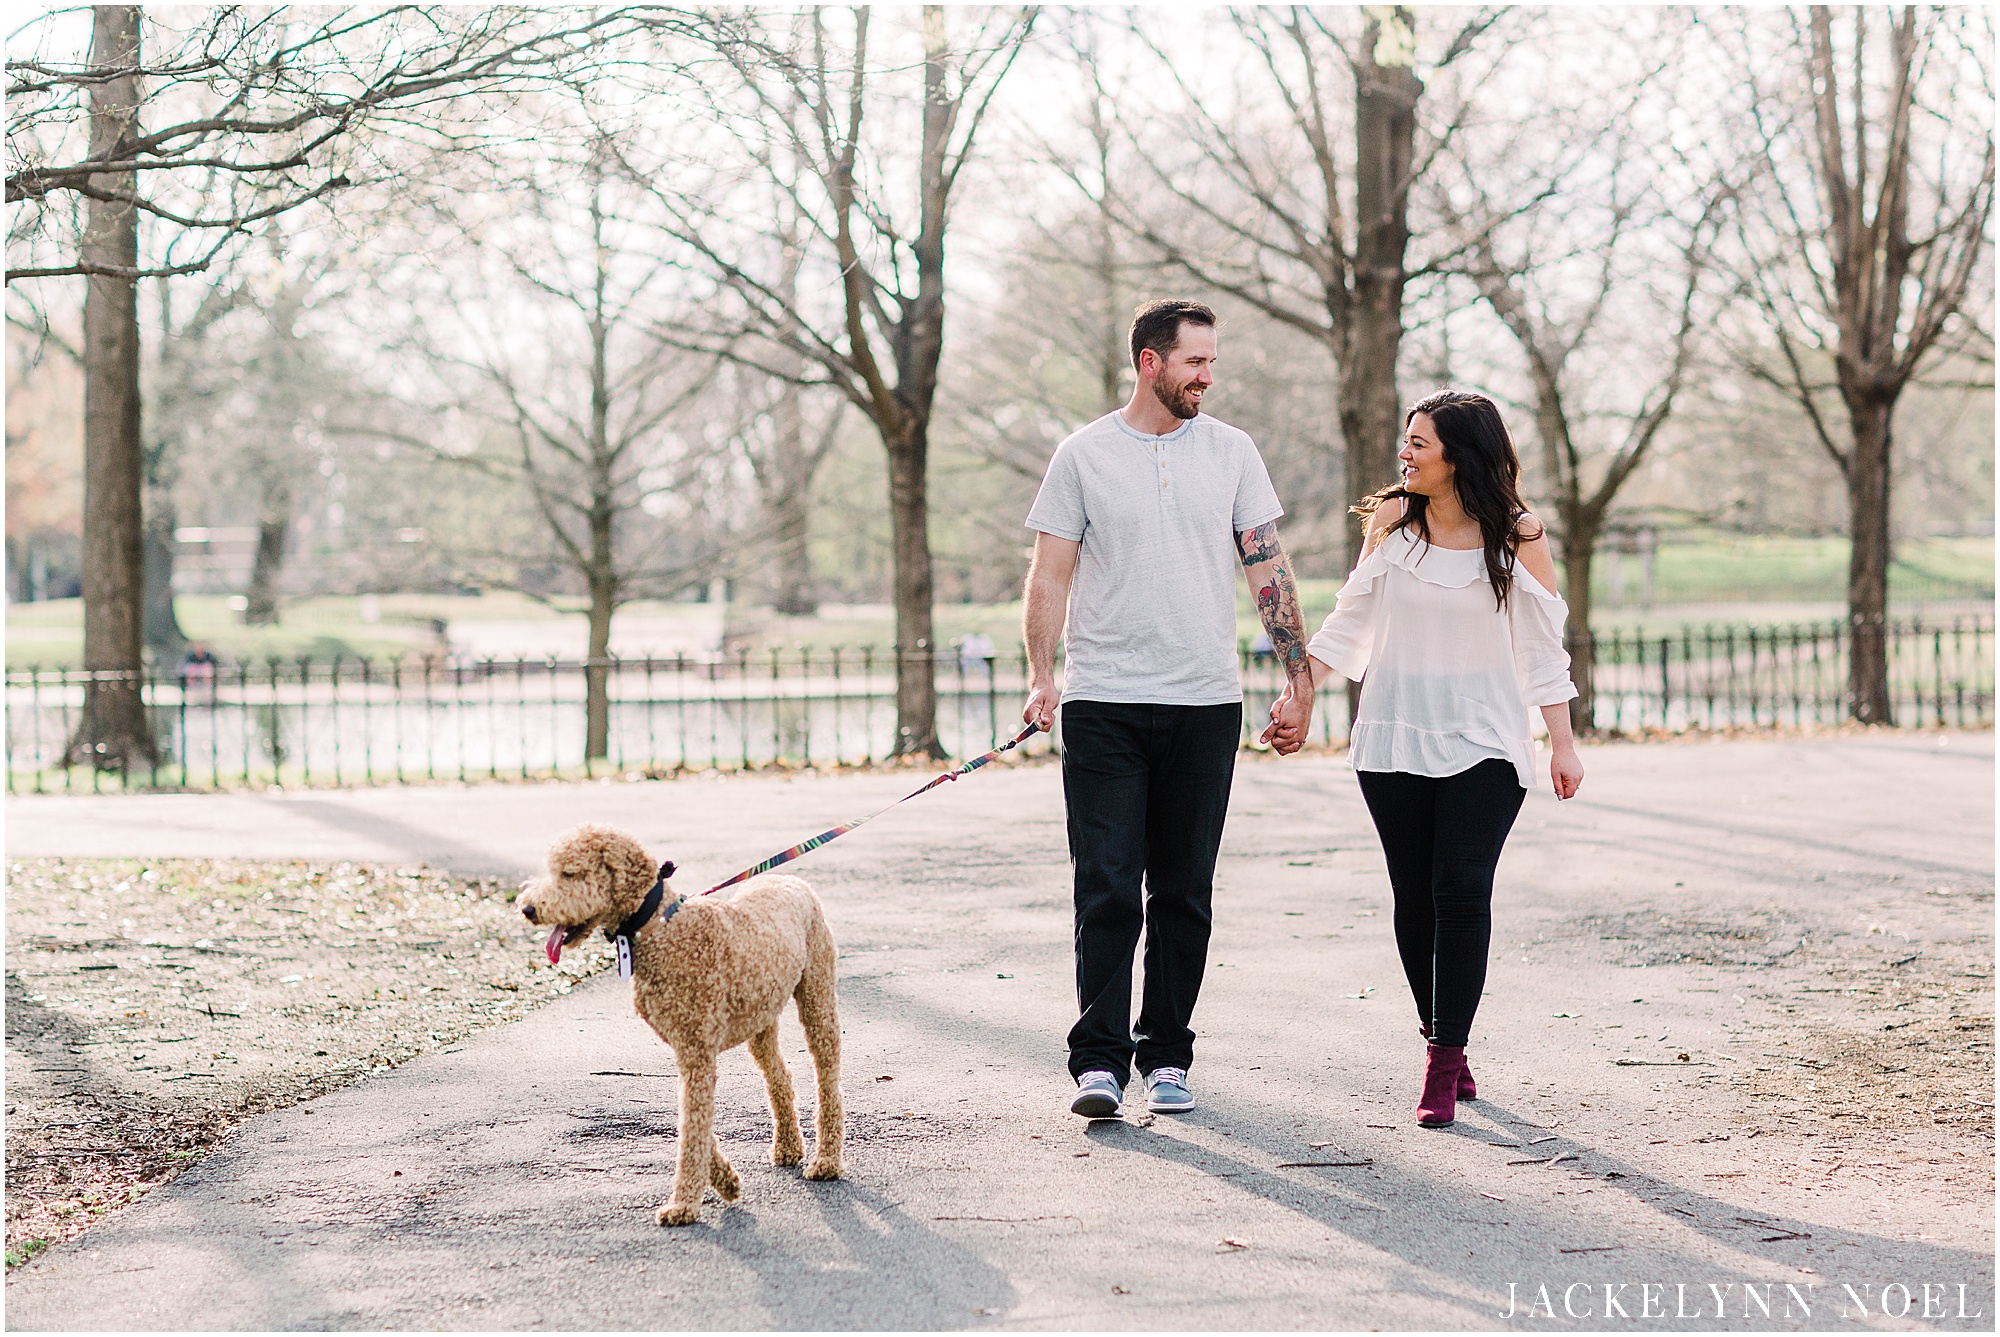 Alison and Tony's engagement session at St. Louis Lafayette Park with their Labradoodle, Larry!